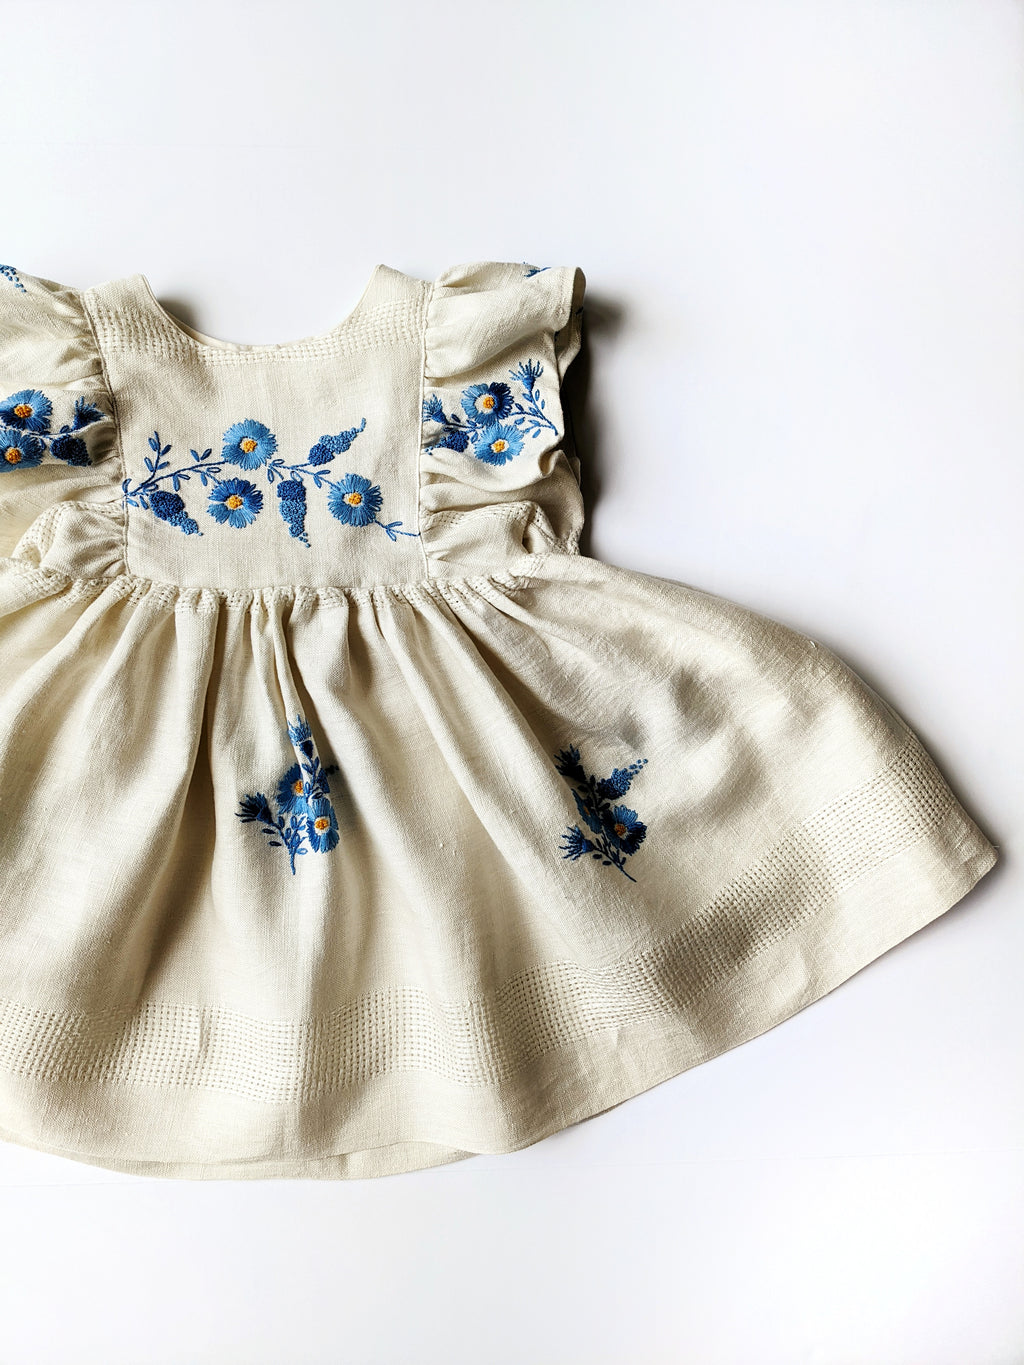 "Camellia" style Embroidered Flutter Dress- Size 5T